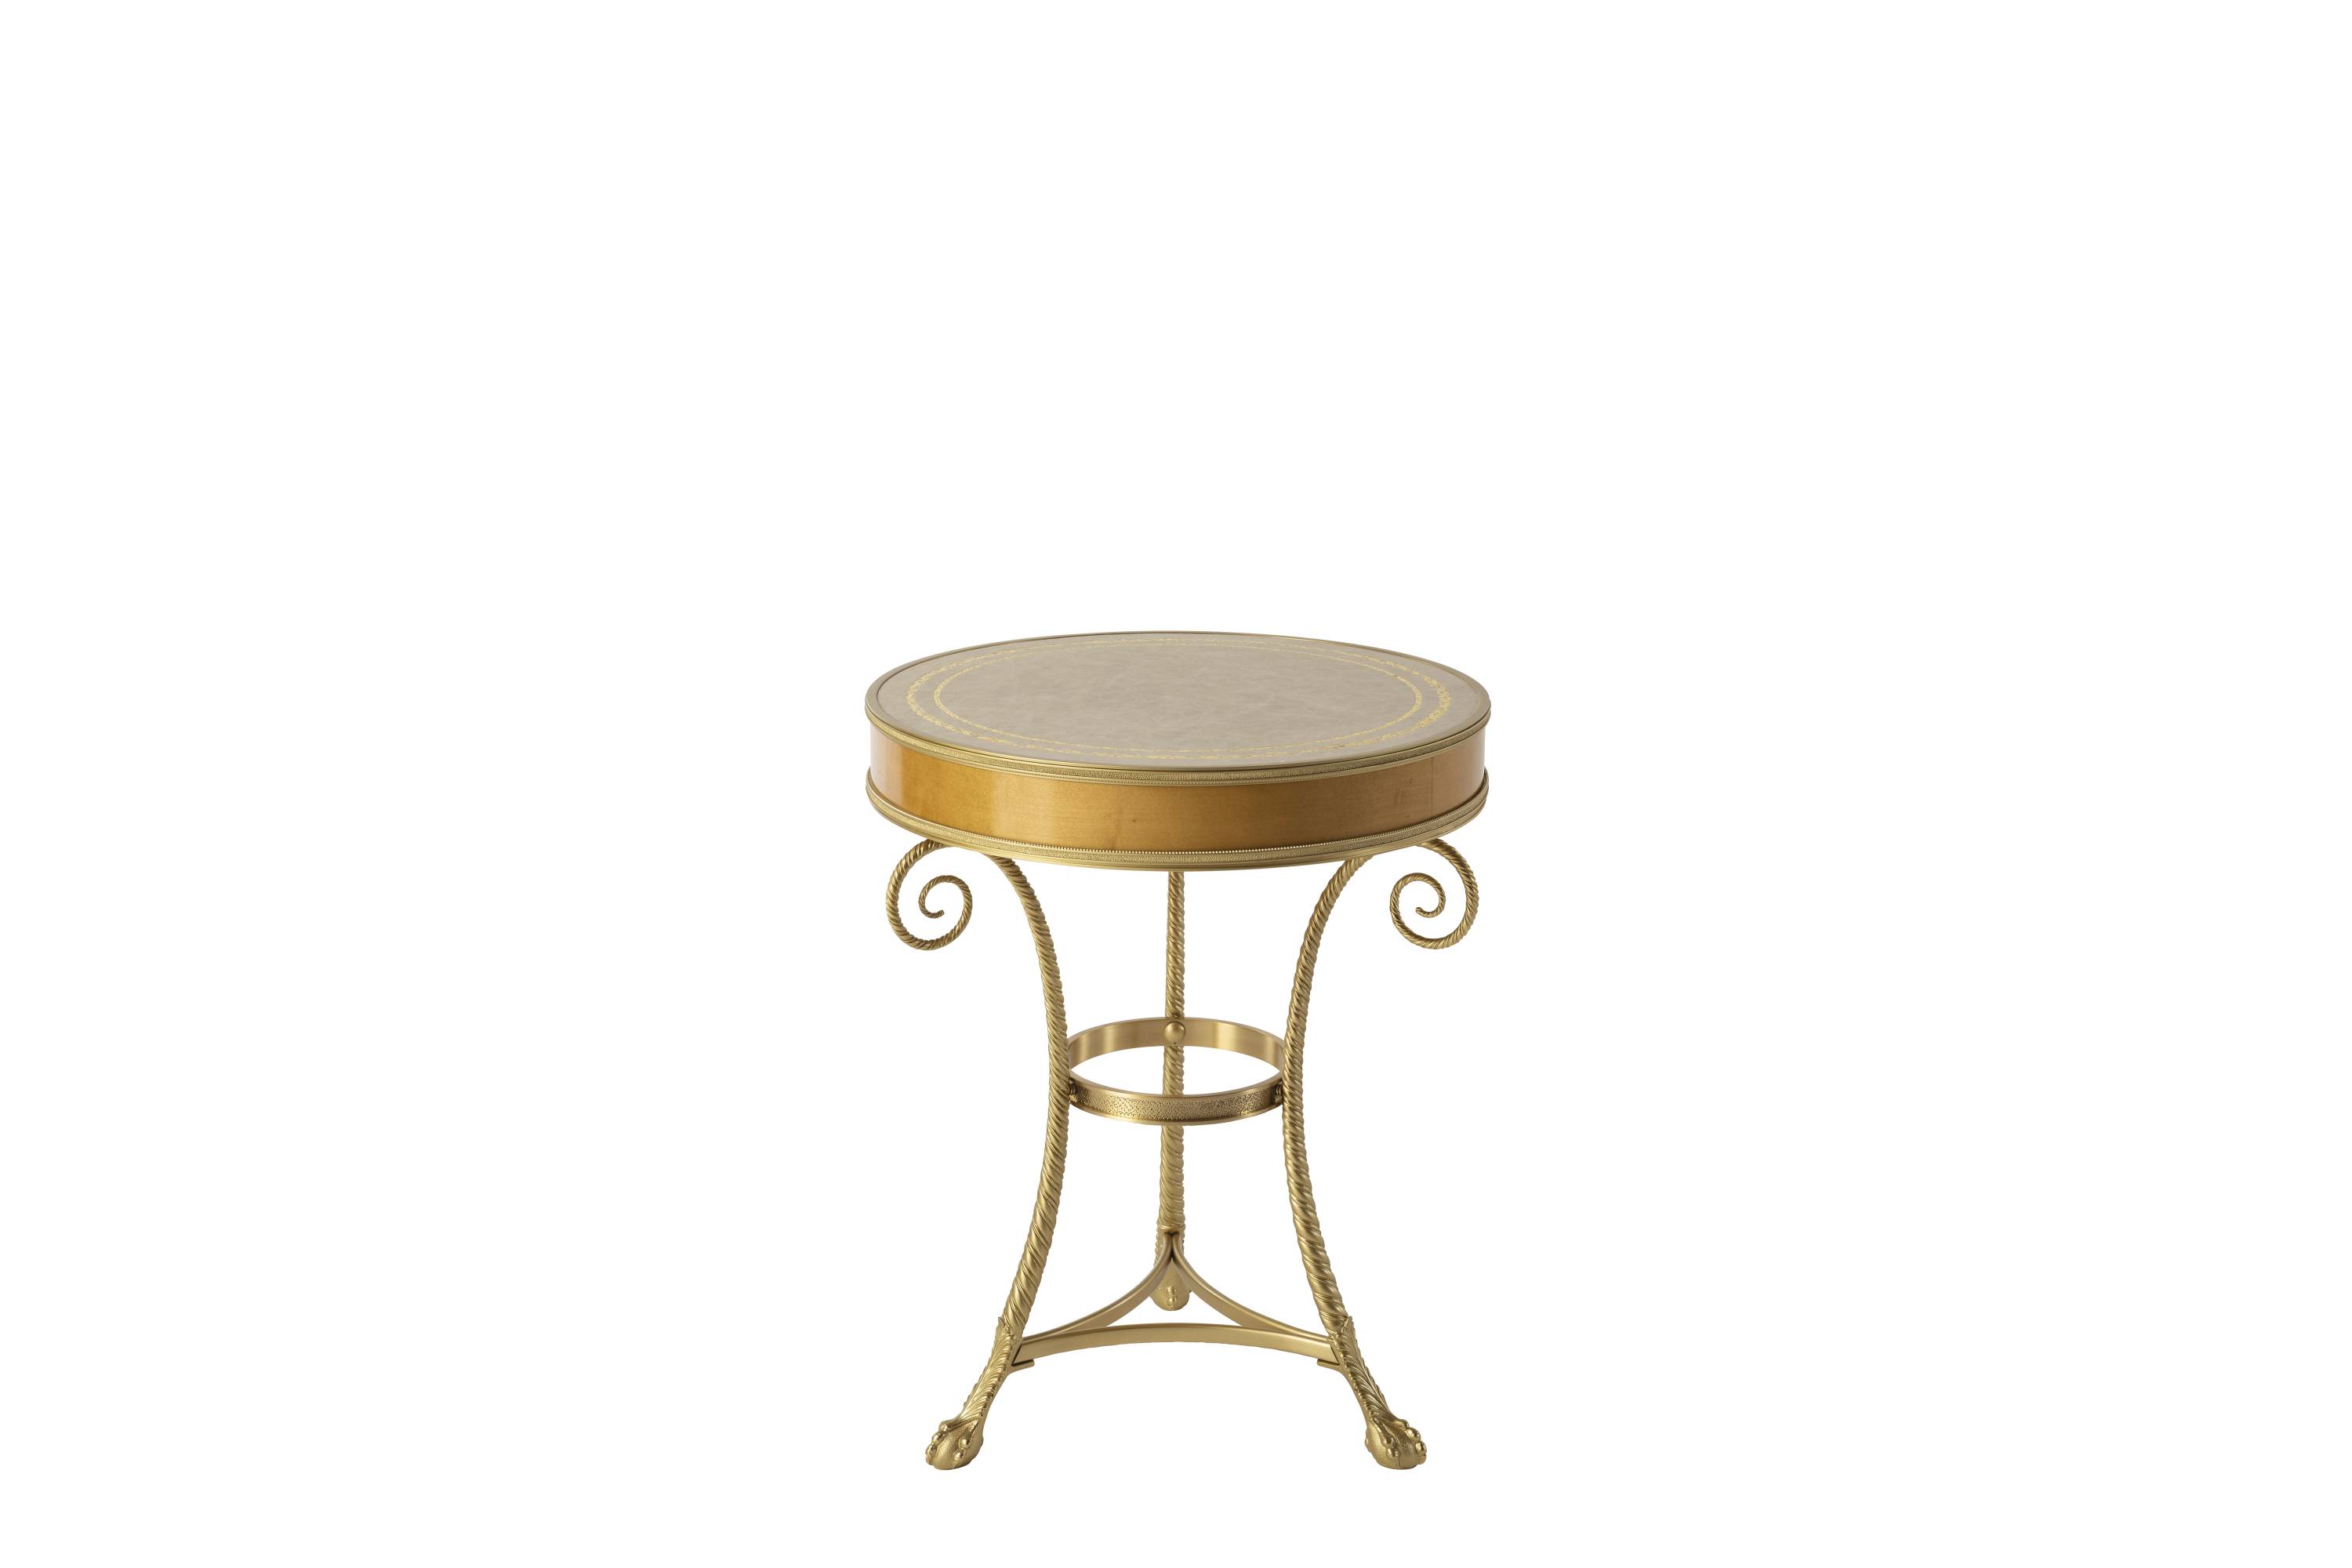 TORCHON low table - Discover the elegance of luxury Héritage collection by Jumbo collection